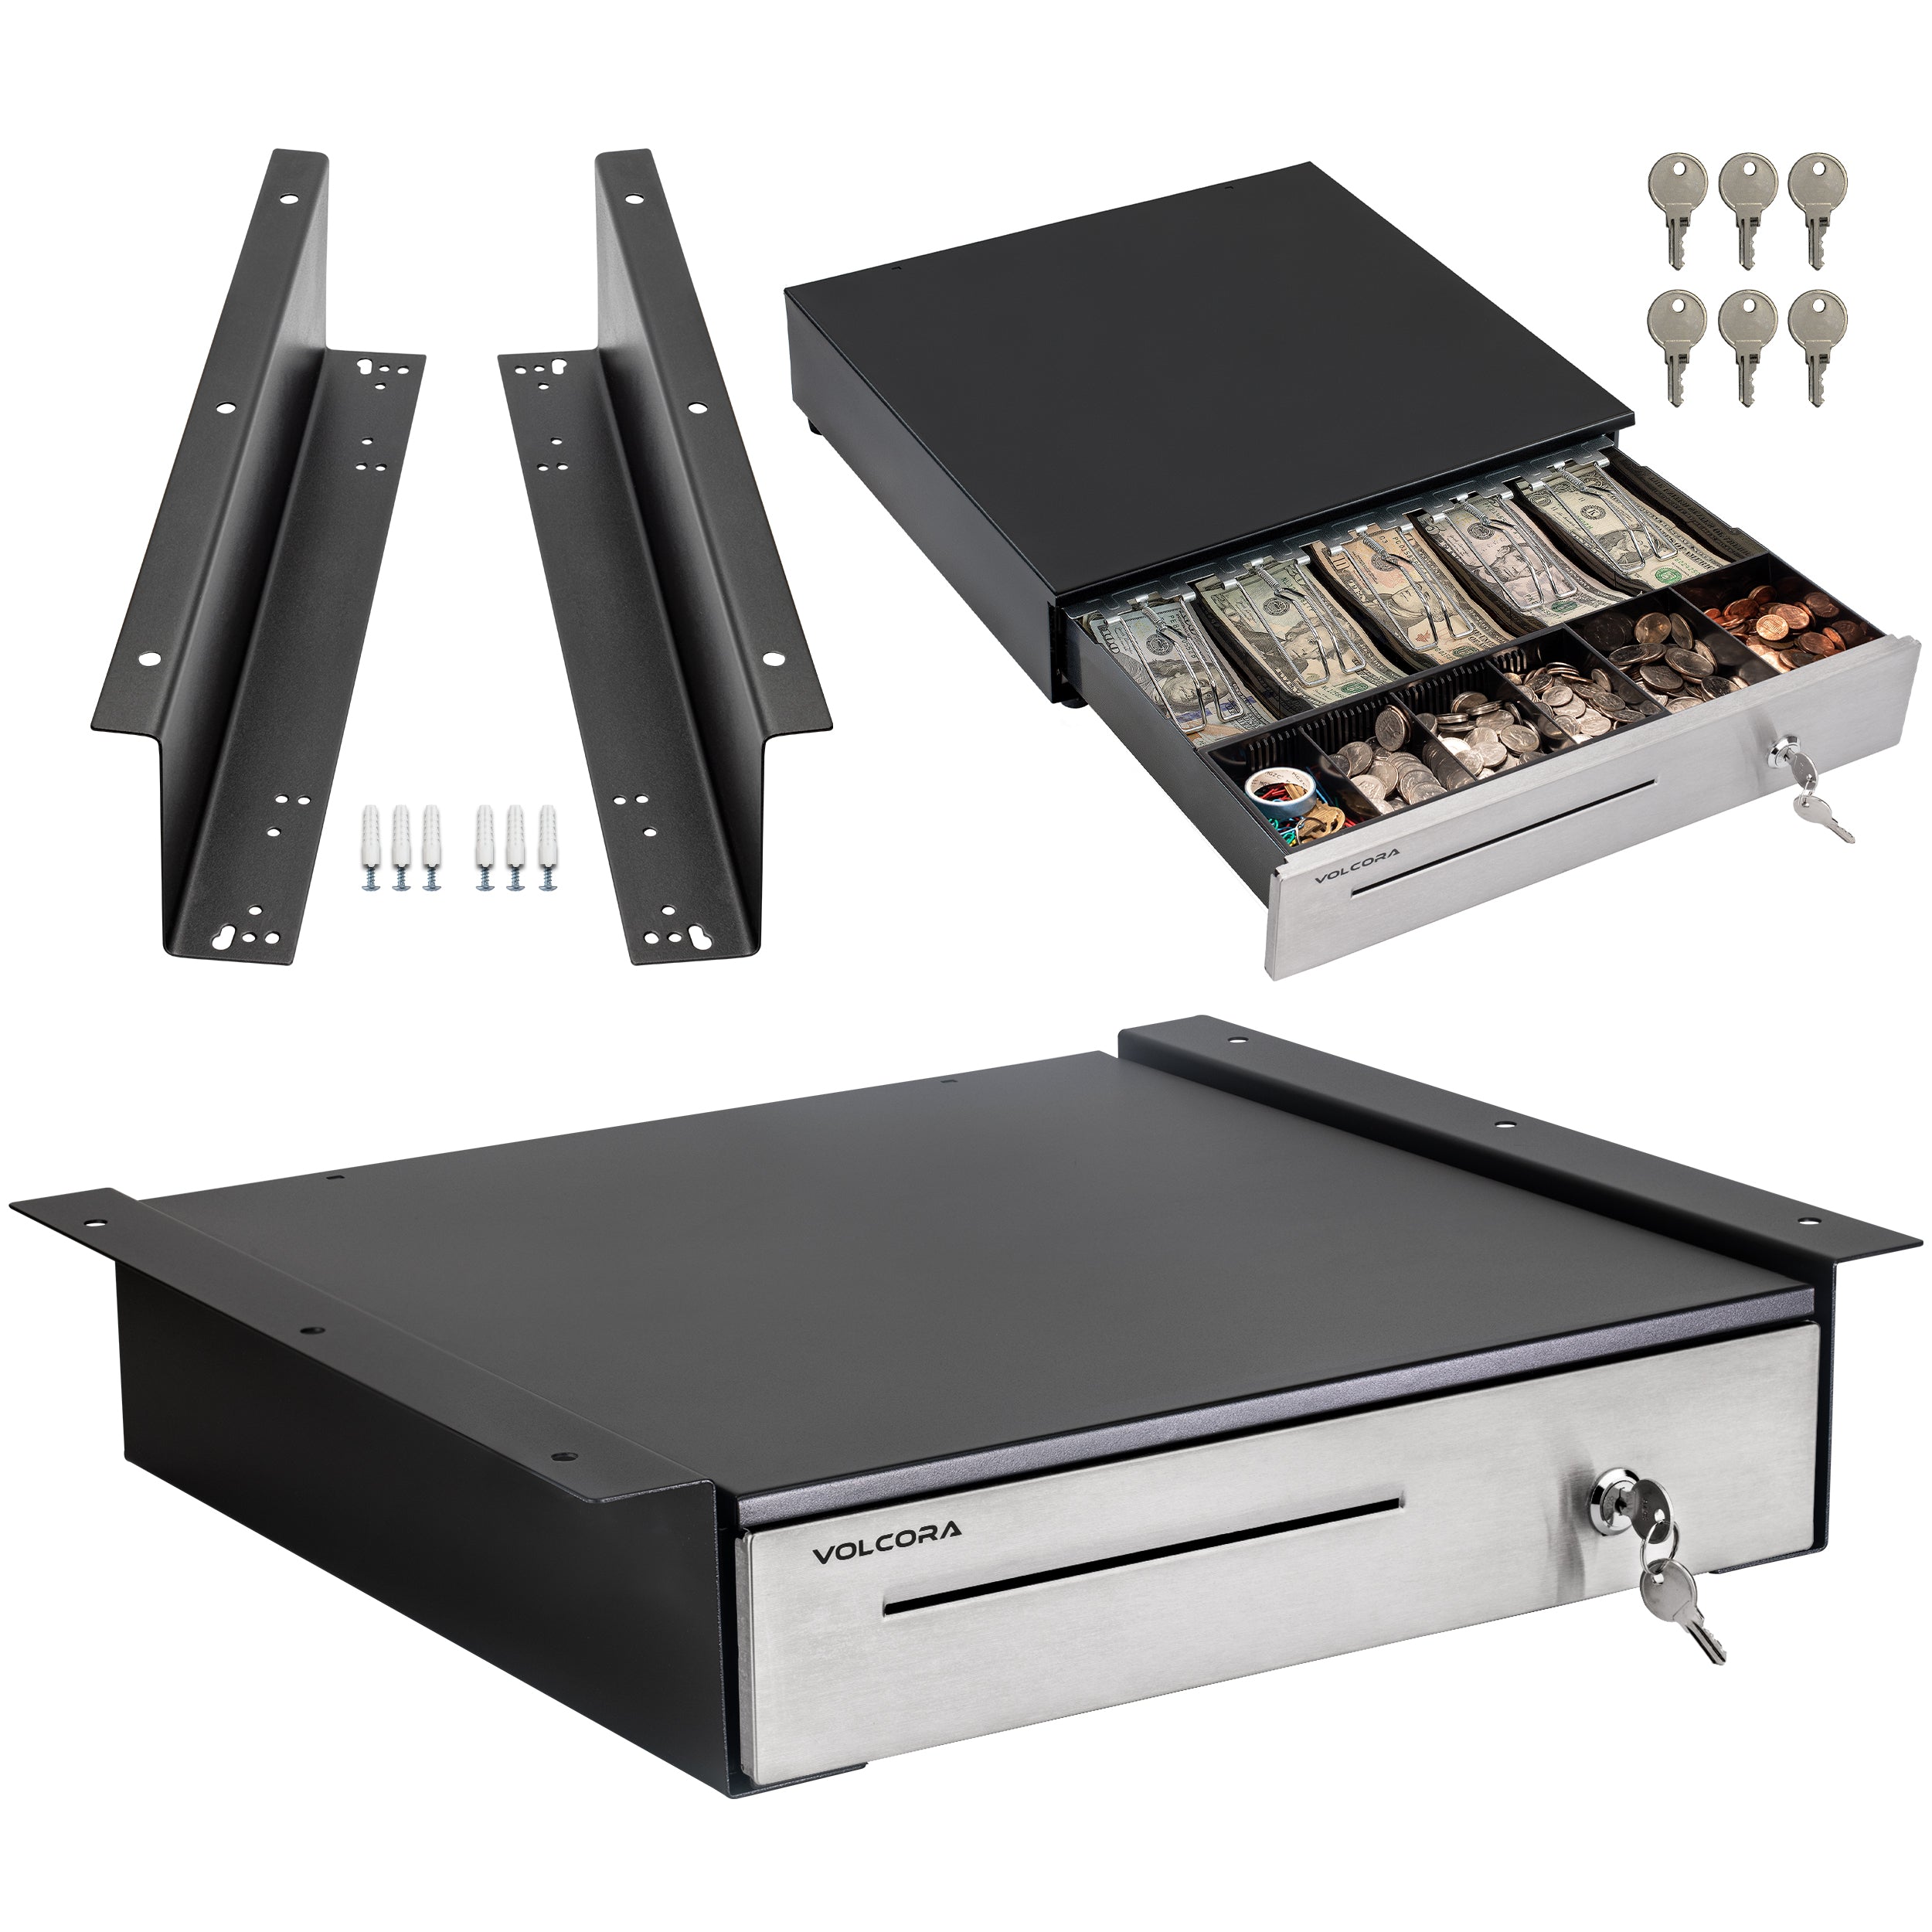 16'' Cash Register Drawer w/ 5 Bill 6 Coin Cash Tray, Auto-open, Black, with Stainless Steel Front